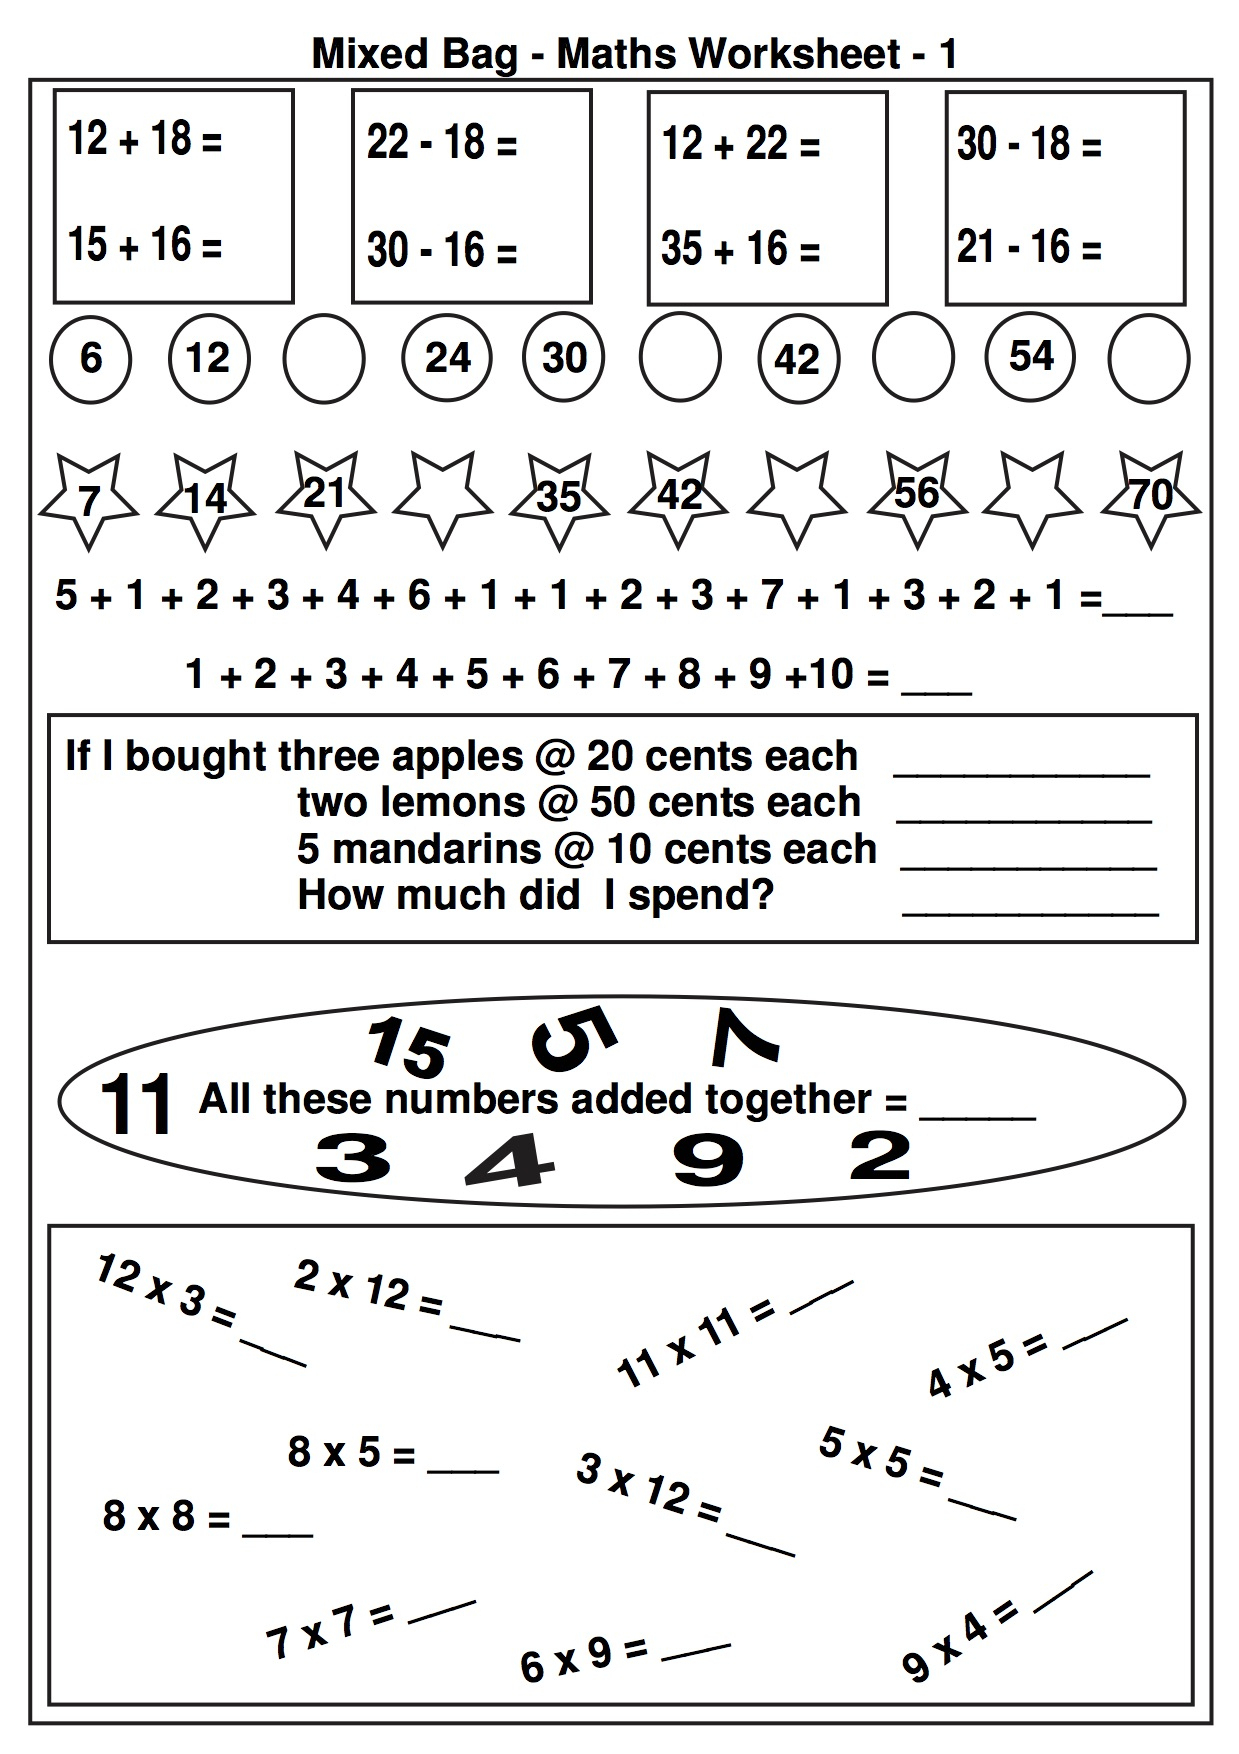 Free Math Worksheets And Printable Math Activities For Elementary | Picture Math Worksheets Printable